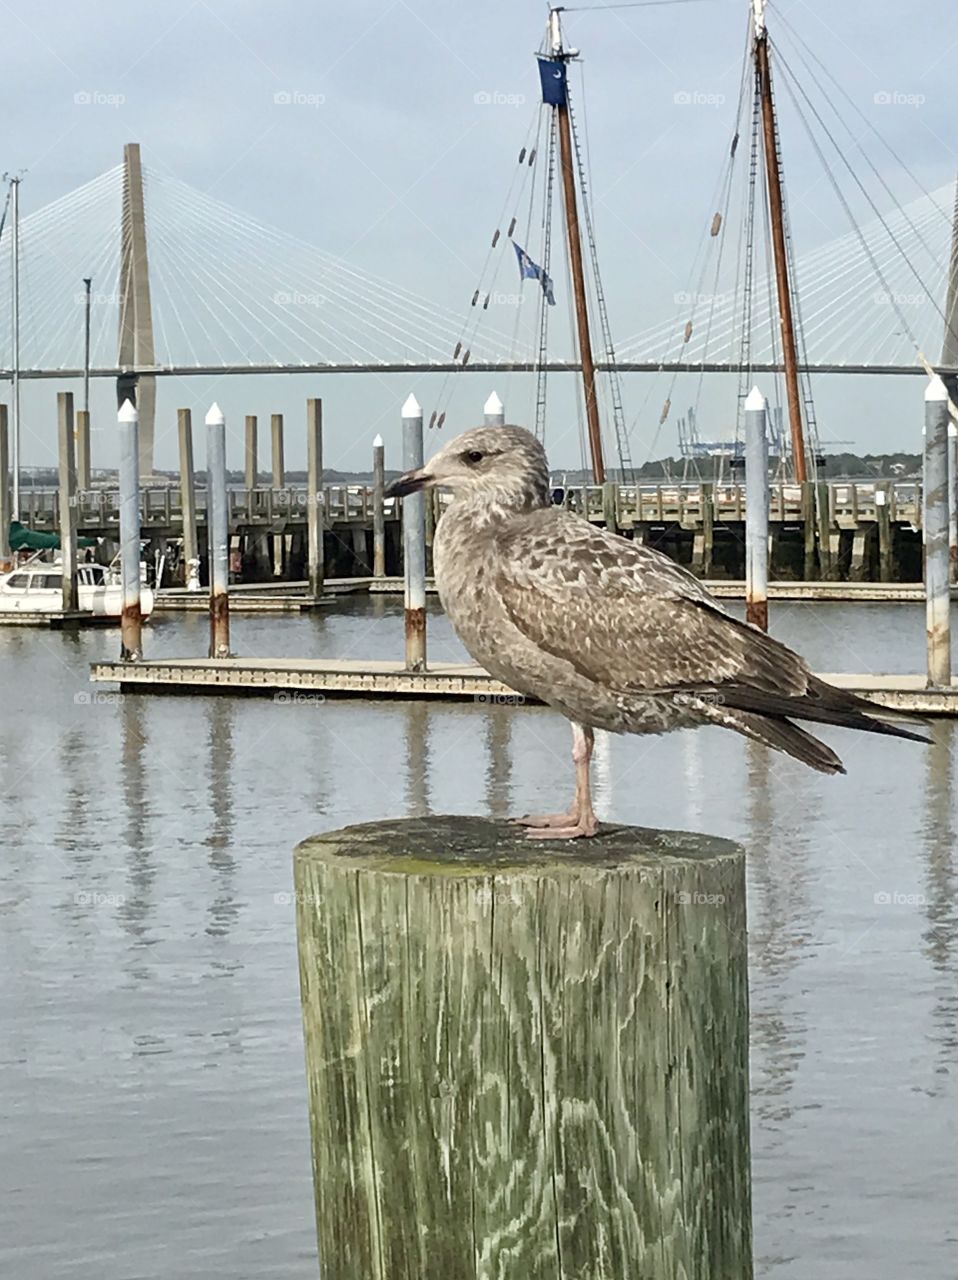 Gull atop a piling at the Marina with boats in the harbor